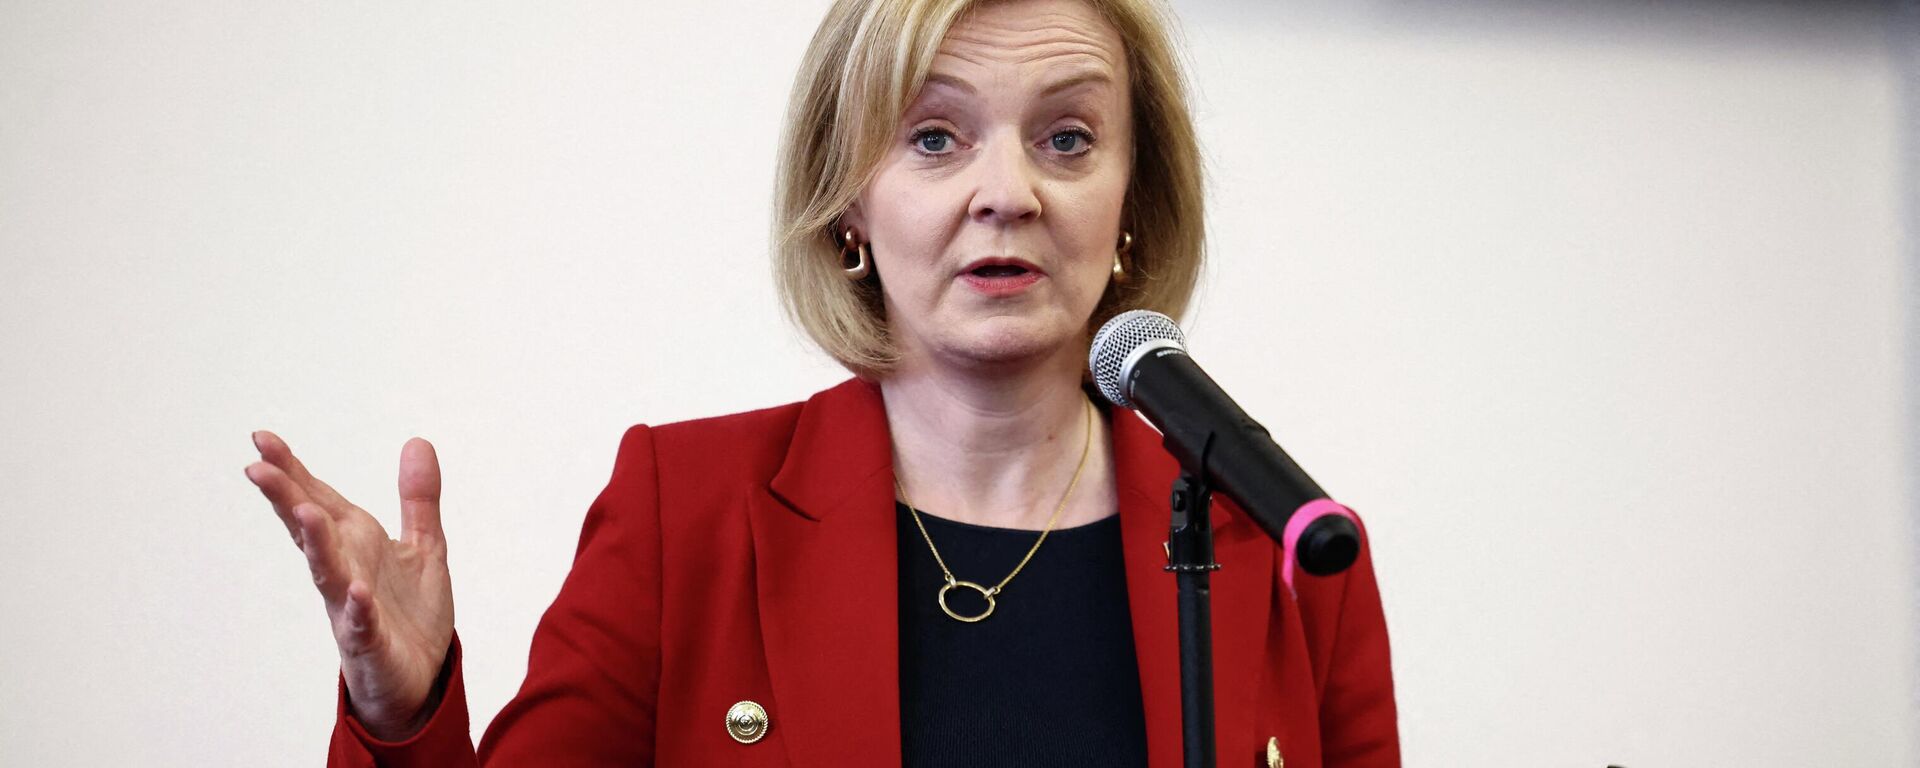 Contender to become the country's next Prime minister and leader of the Conservative party British Foreign Secretary Liz Truss delivers a speech during a campaign event in Leeds, on July 28, 2022 - Sputnik International, 1920, 21.08.2022